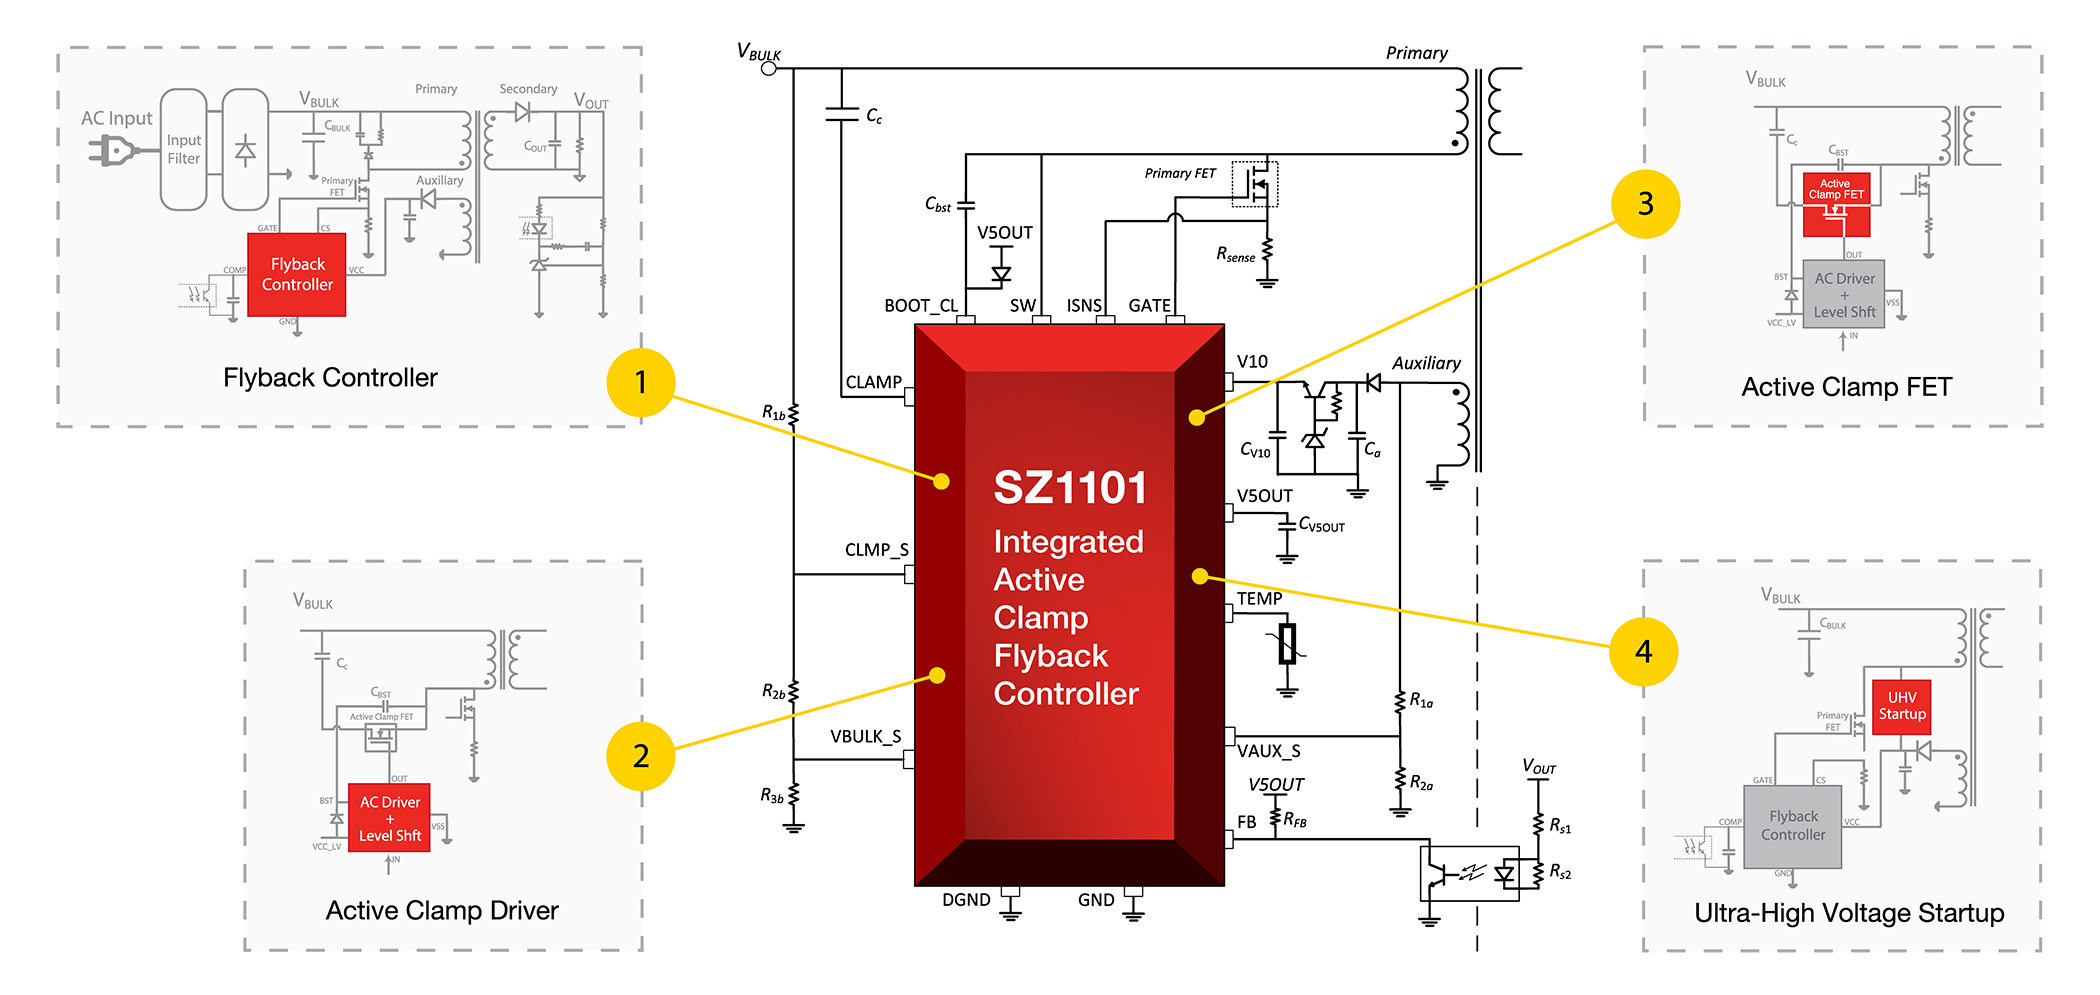 Silanna SZ1101 Flyback PWM Controller integrates four pieces of an ACF controller, including an advanced ACF and three UHV components; active clamp driver, active clamp FET, startup voltage regulator.